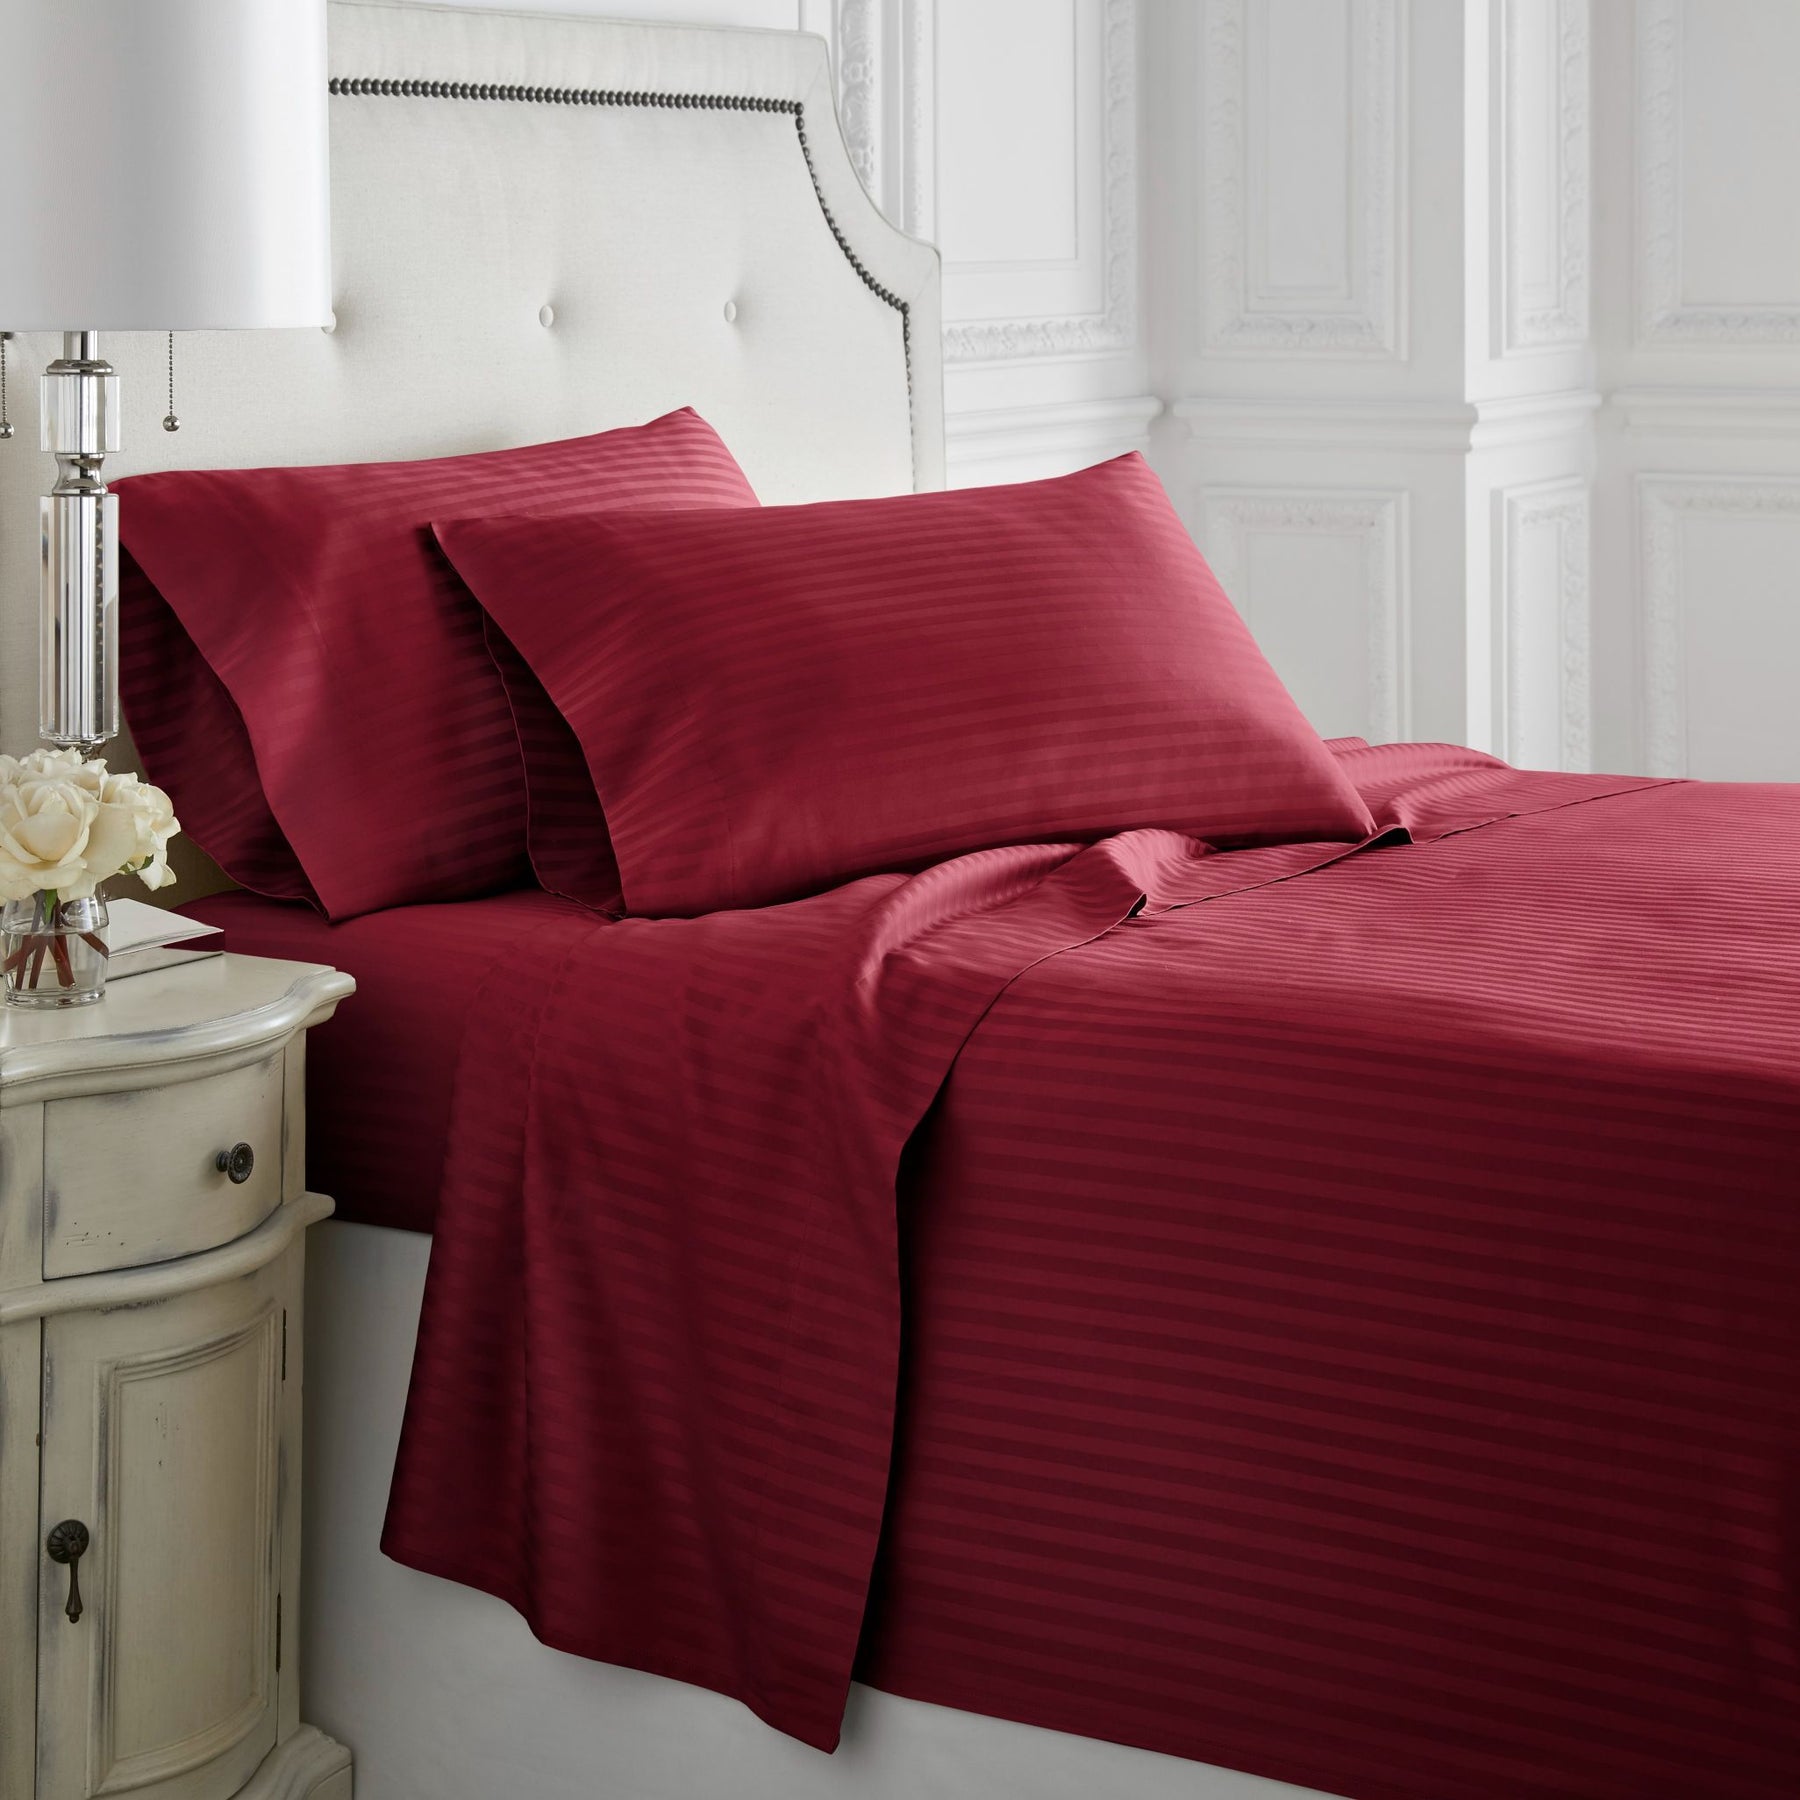 1500 Thread Count Solid Egyptian Cotton Sheets | REB